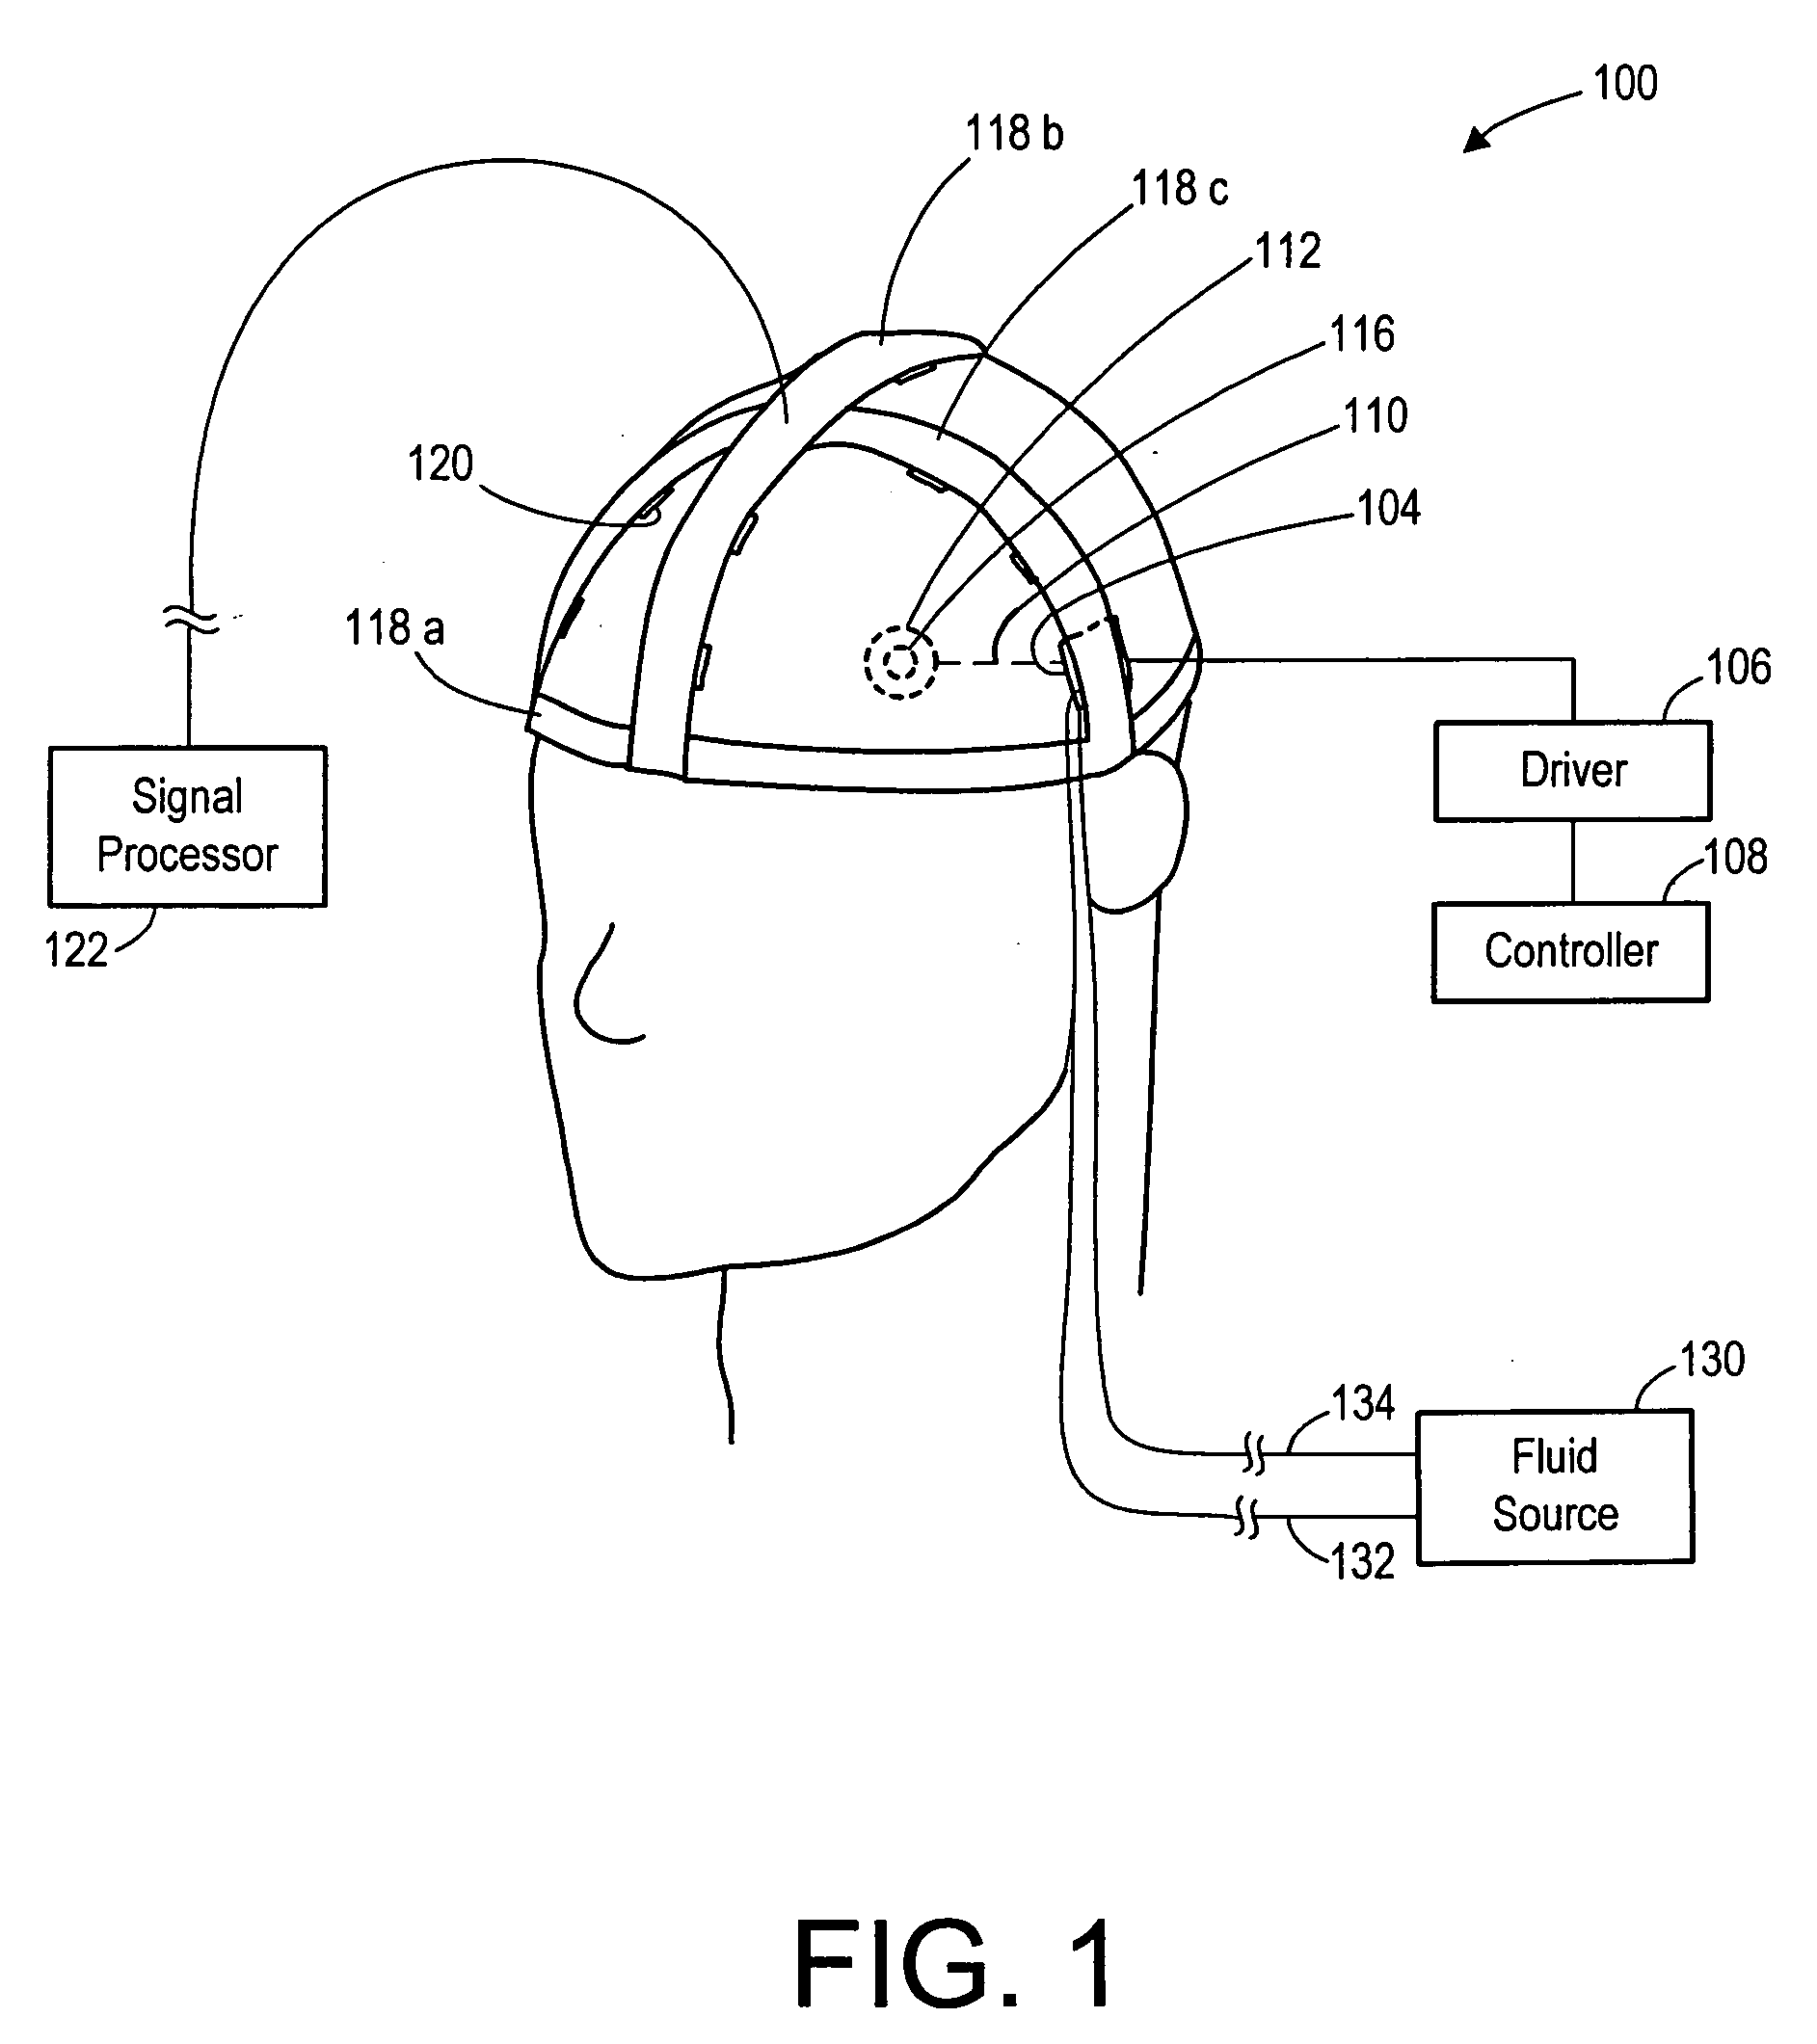 Apparatus and methods for delivering acoustic energy to body tissue